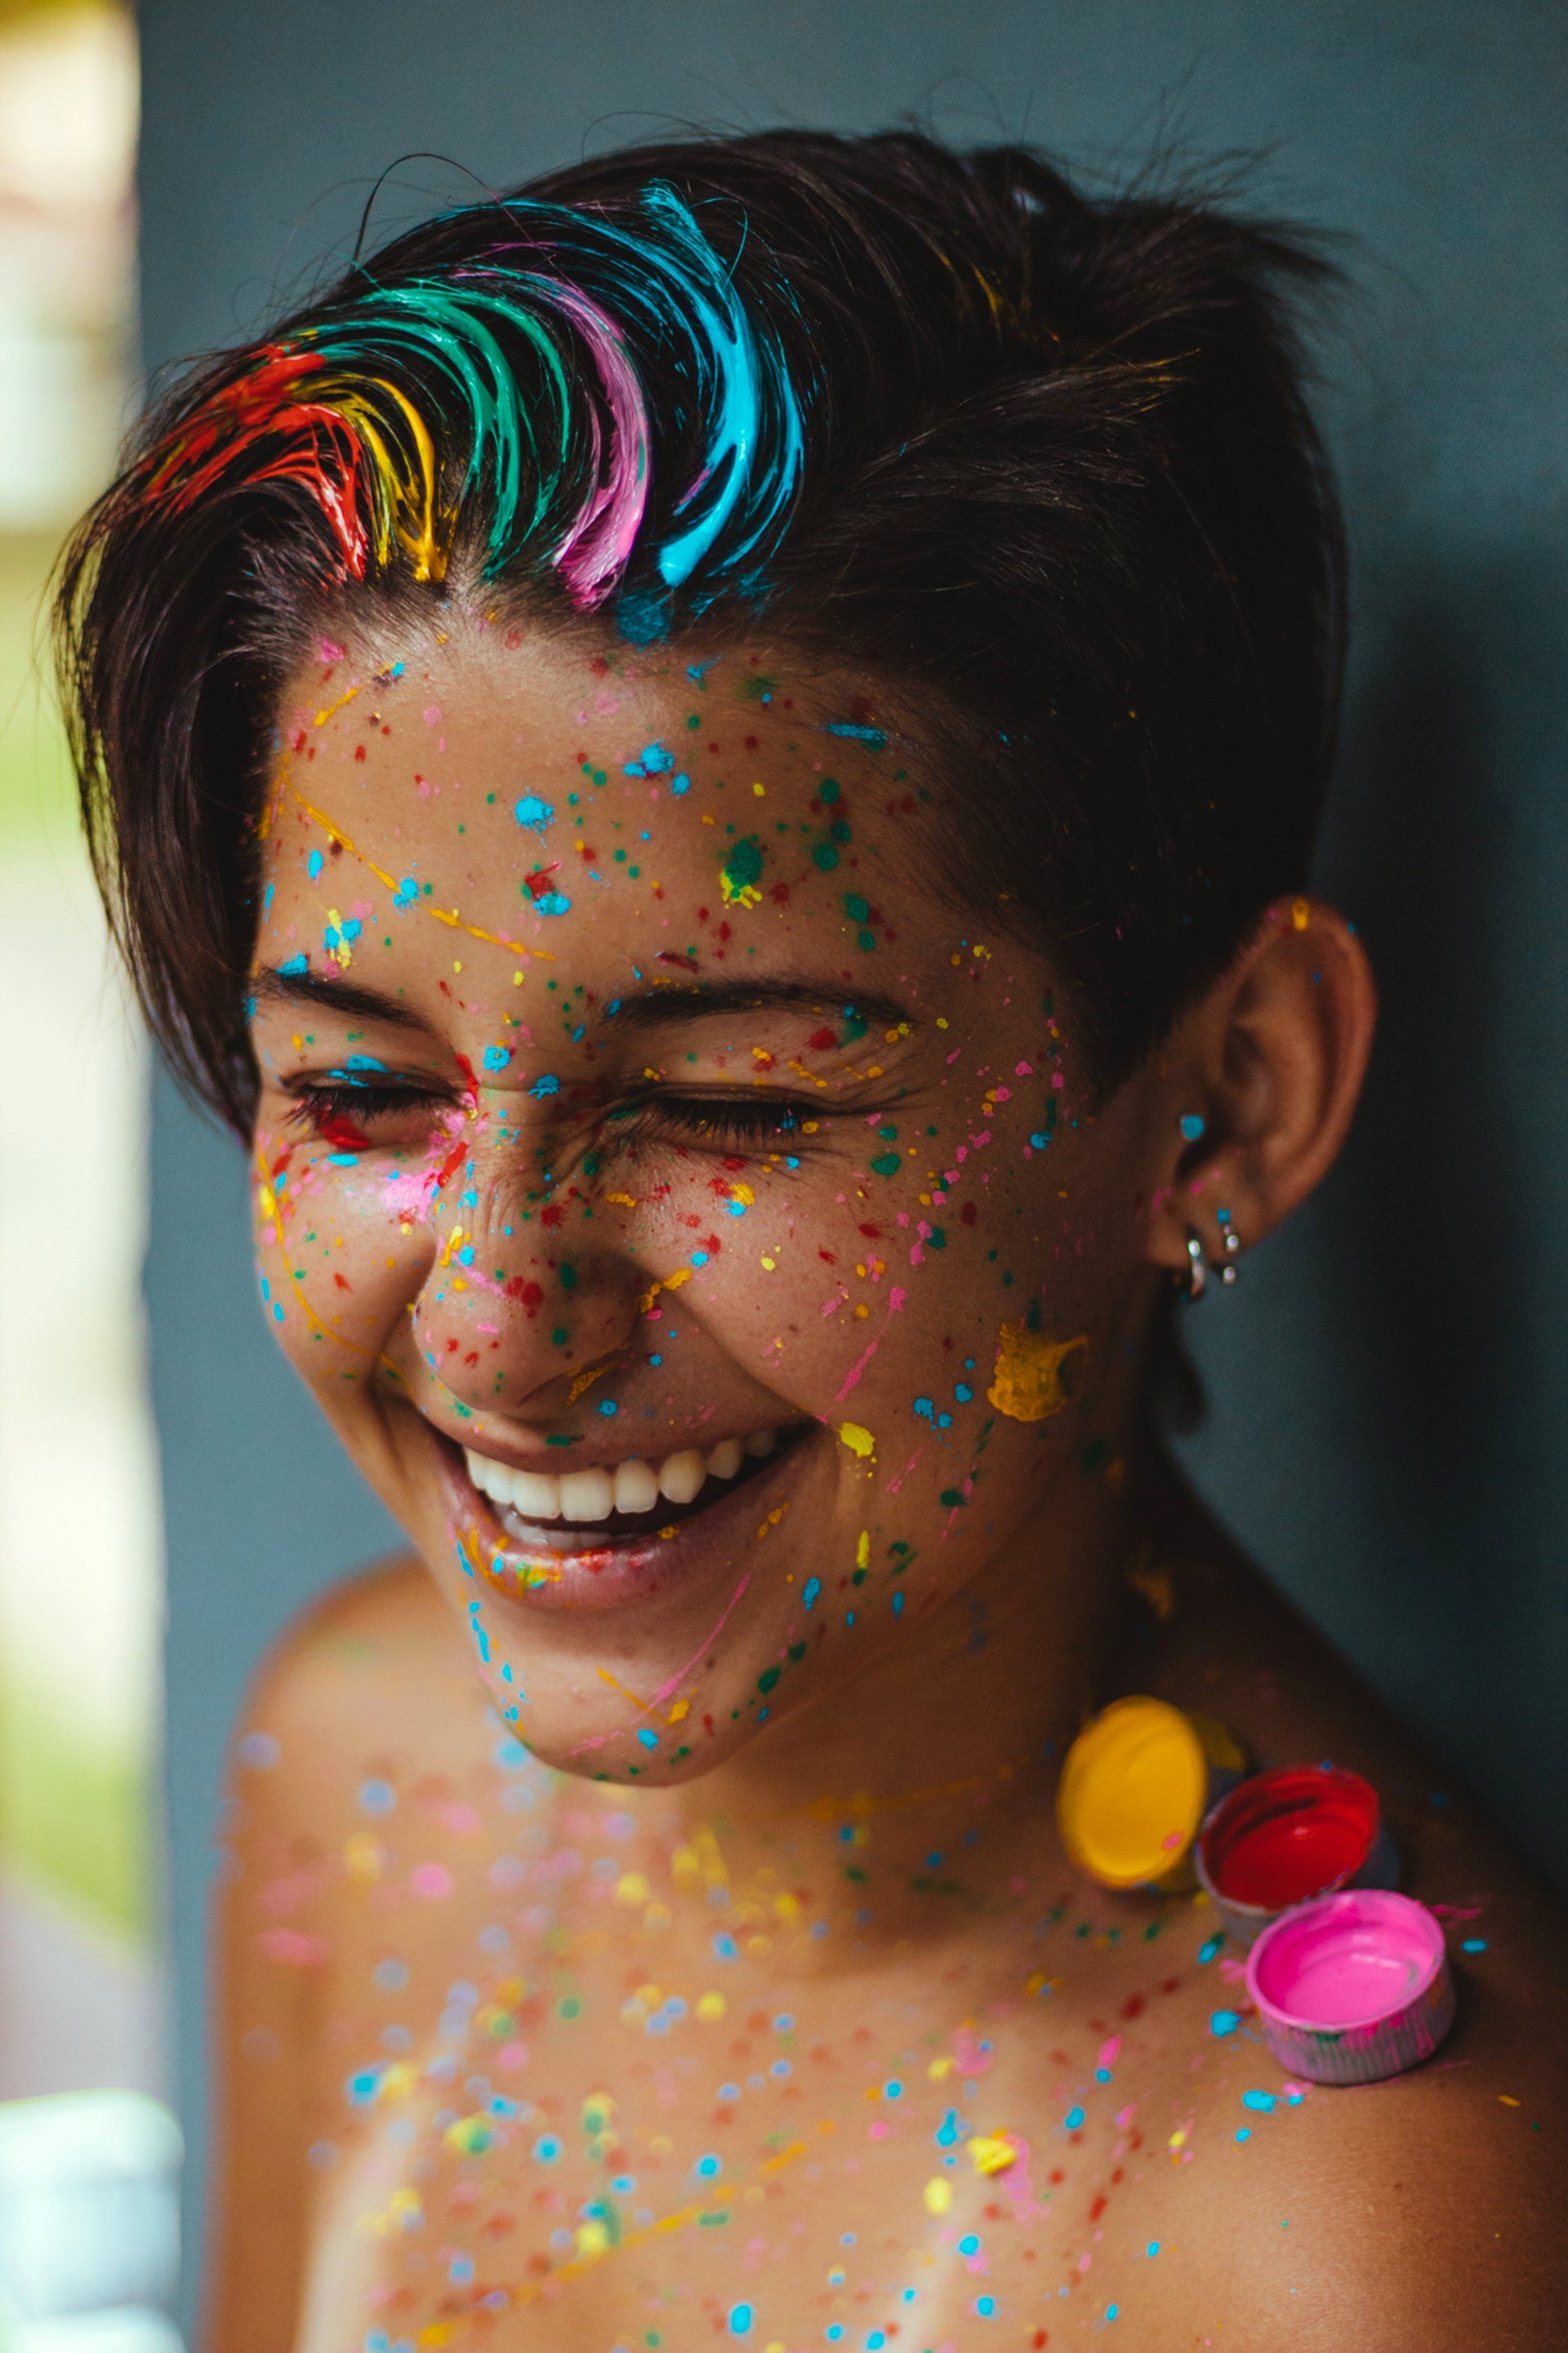 A woman with rainbow hair and confetti on her face is smiling.